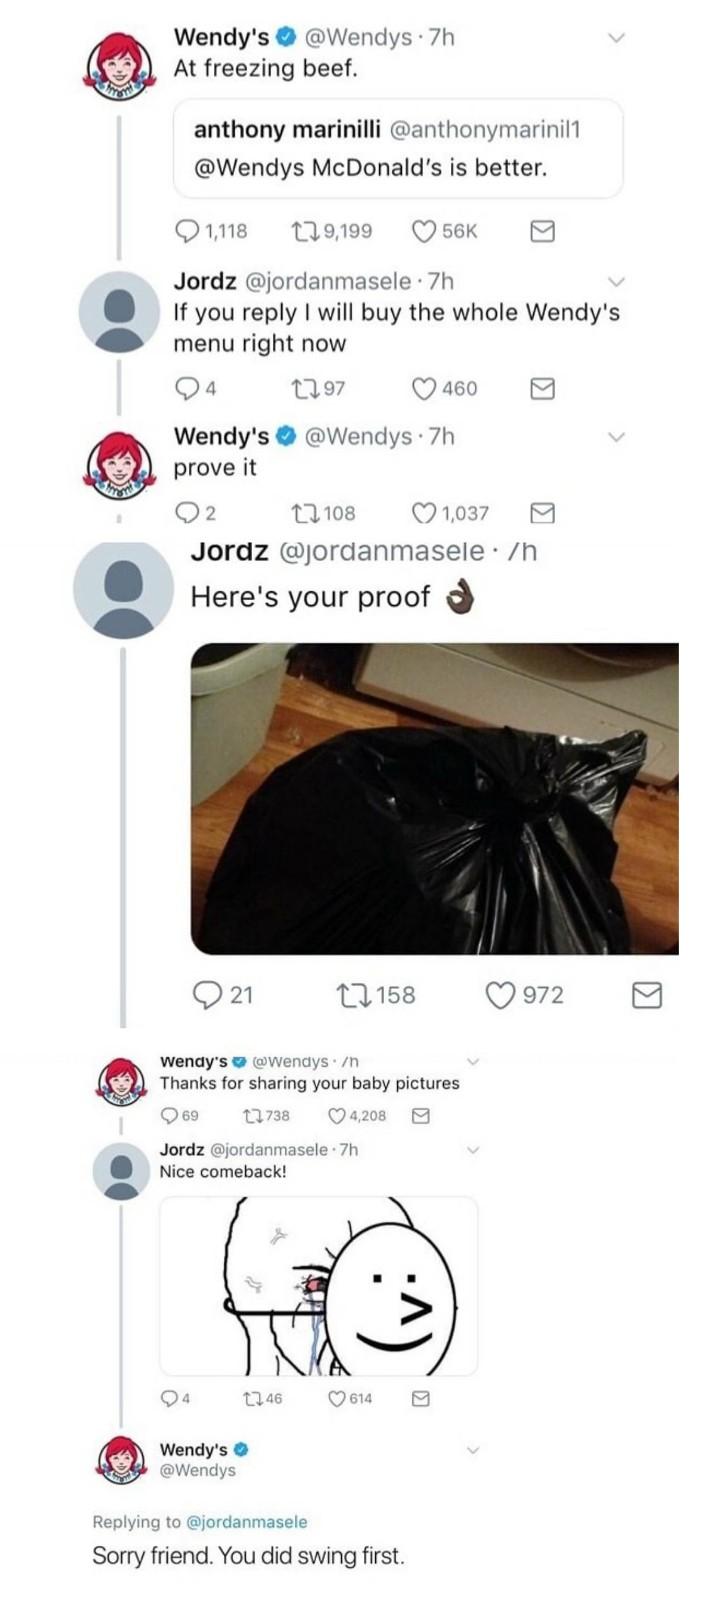 Wendy's never loses